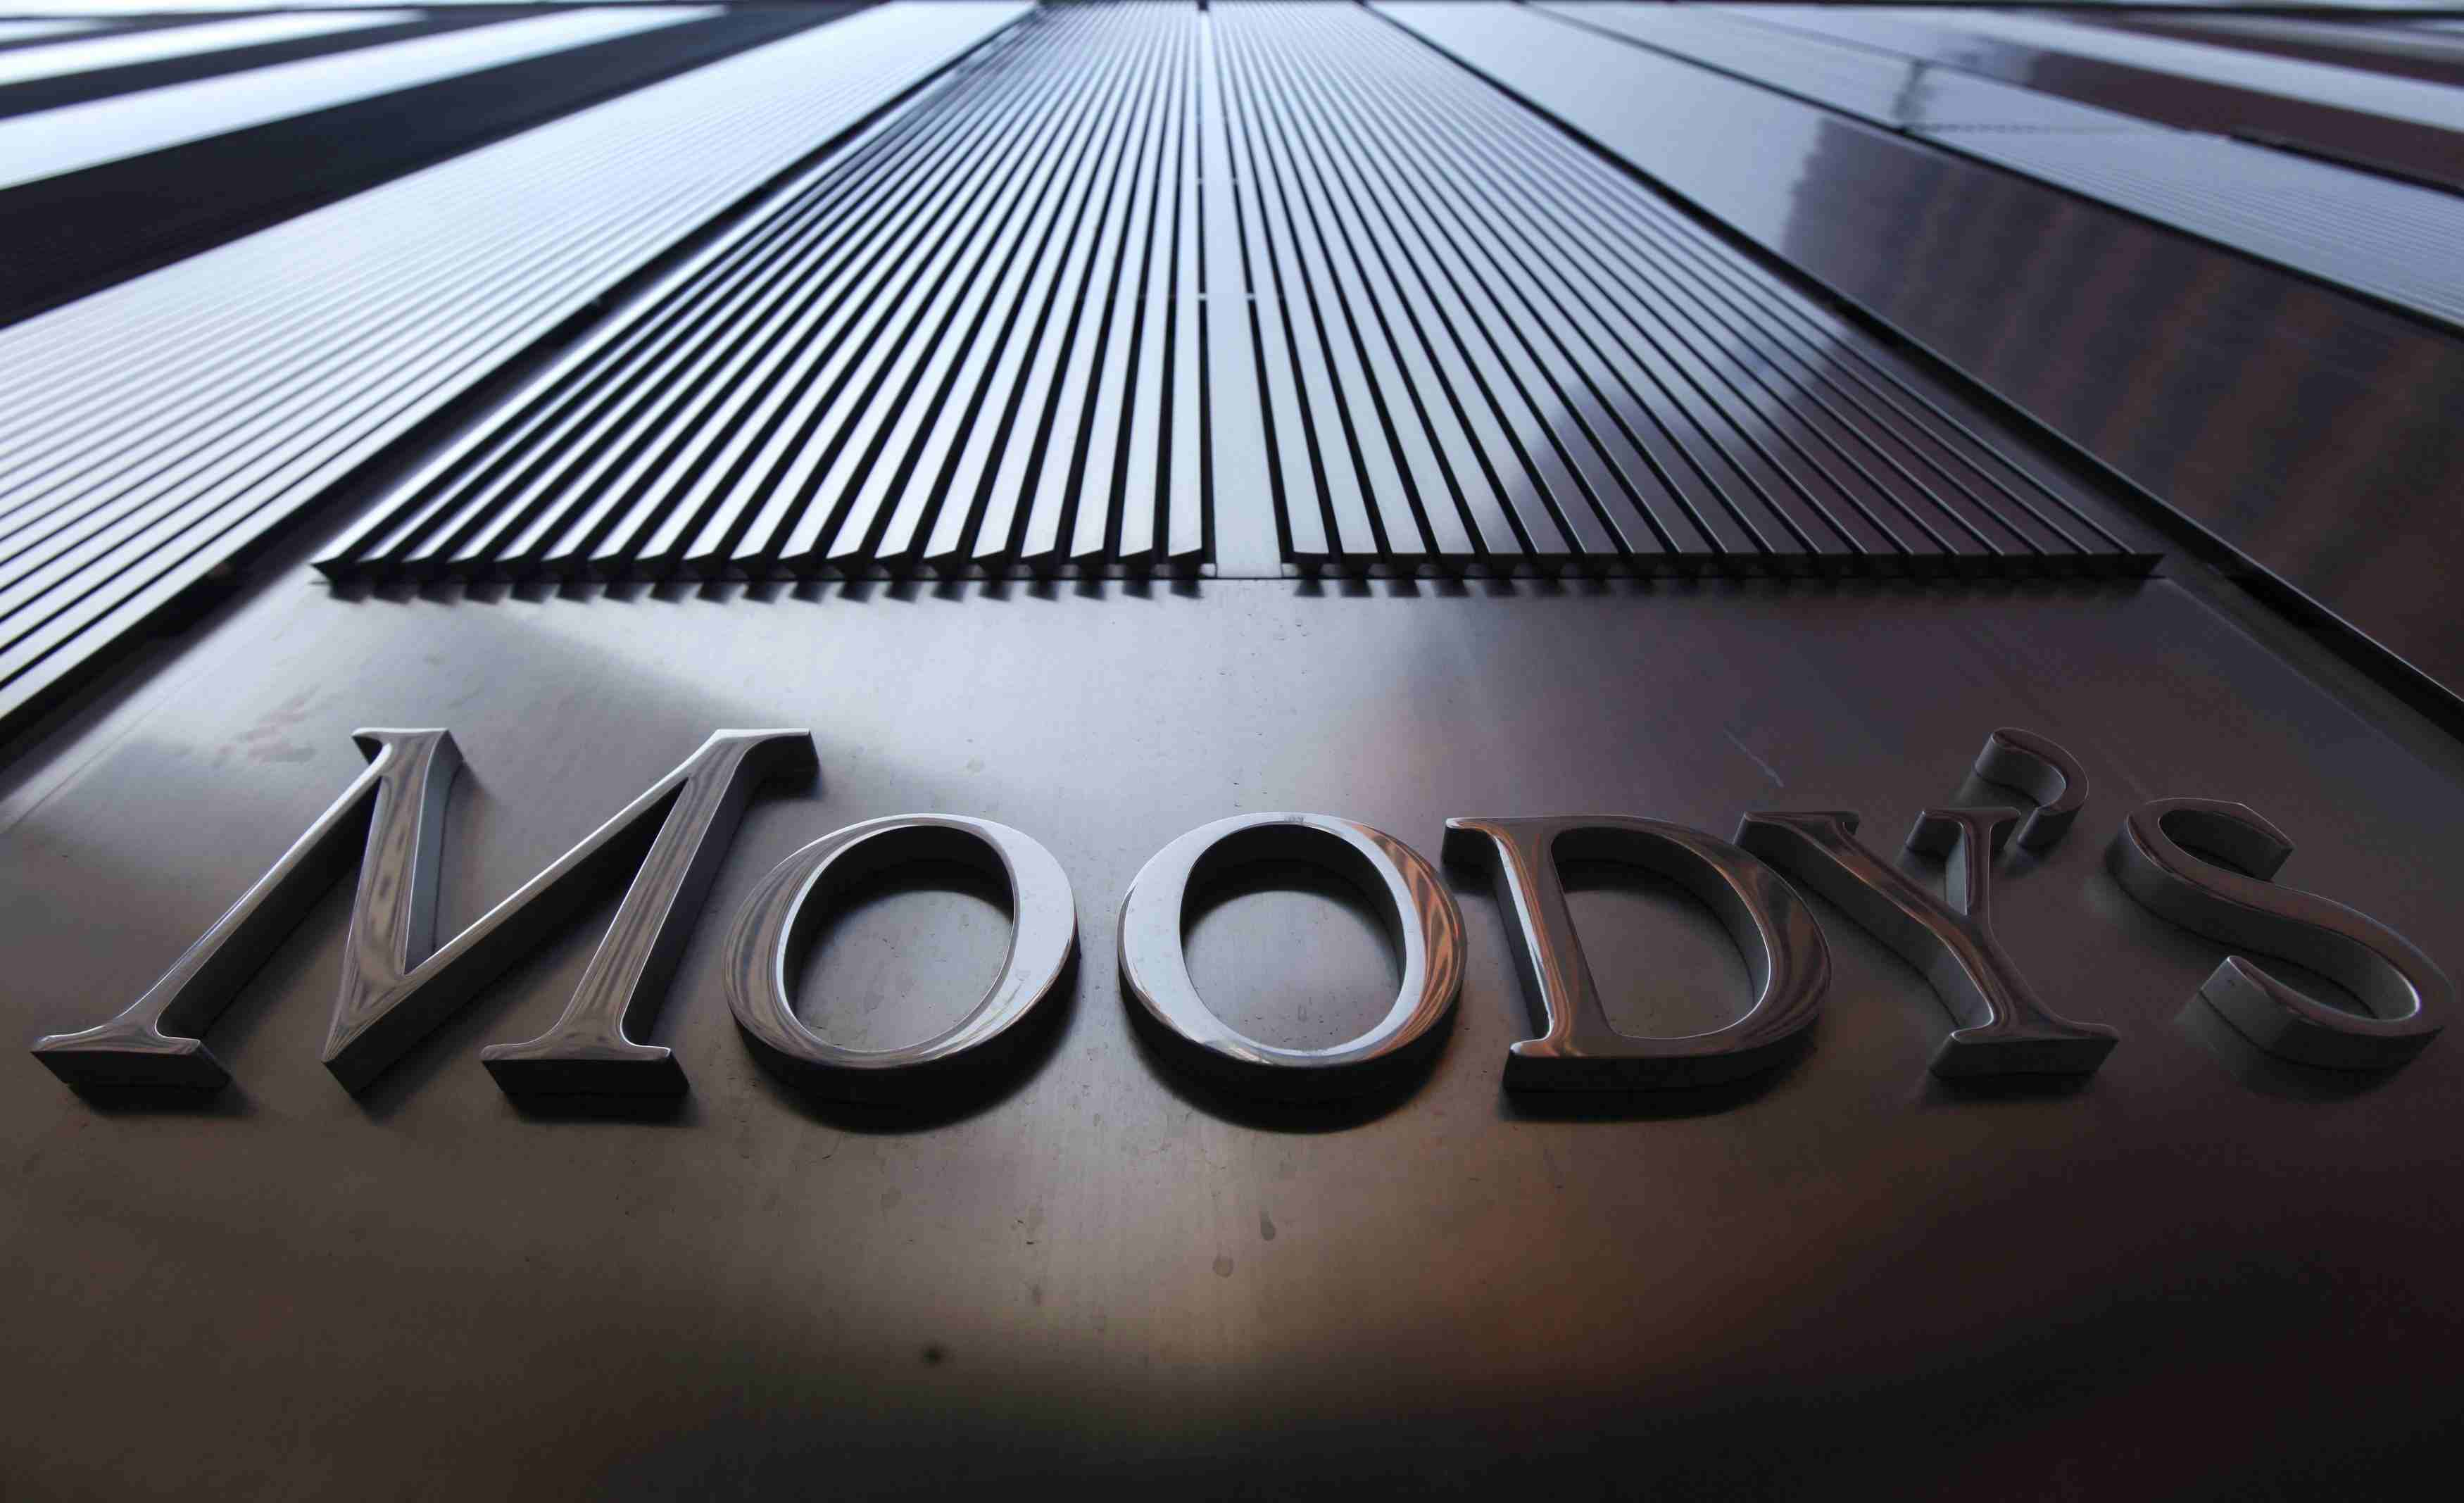 Moody's: Spain will be poorer if Catalonia becomes independent